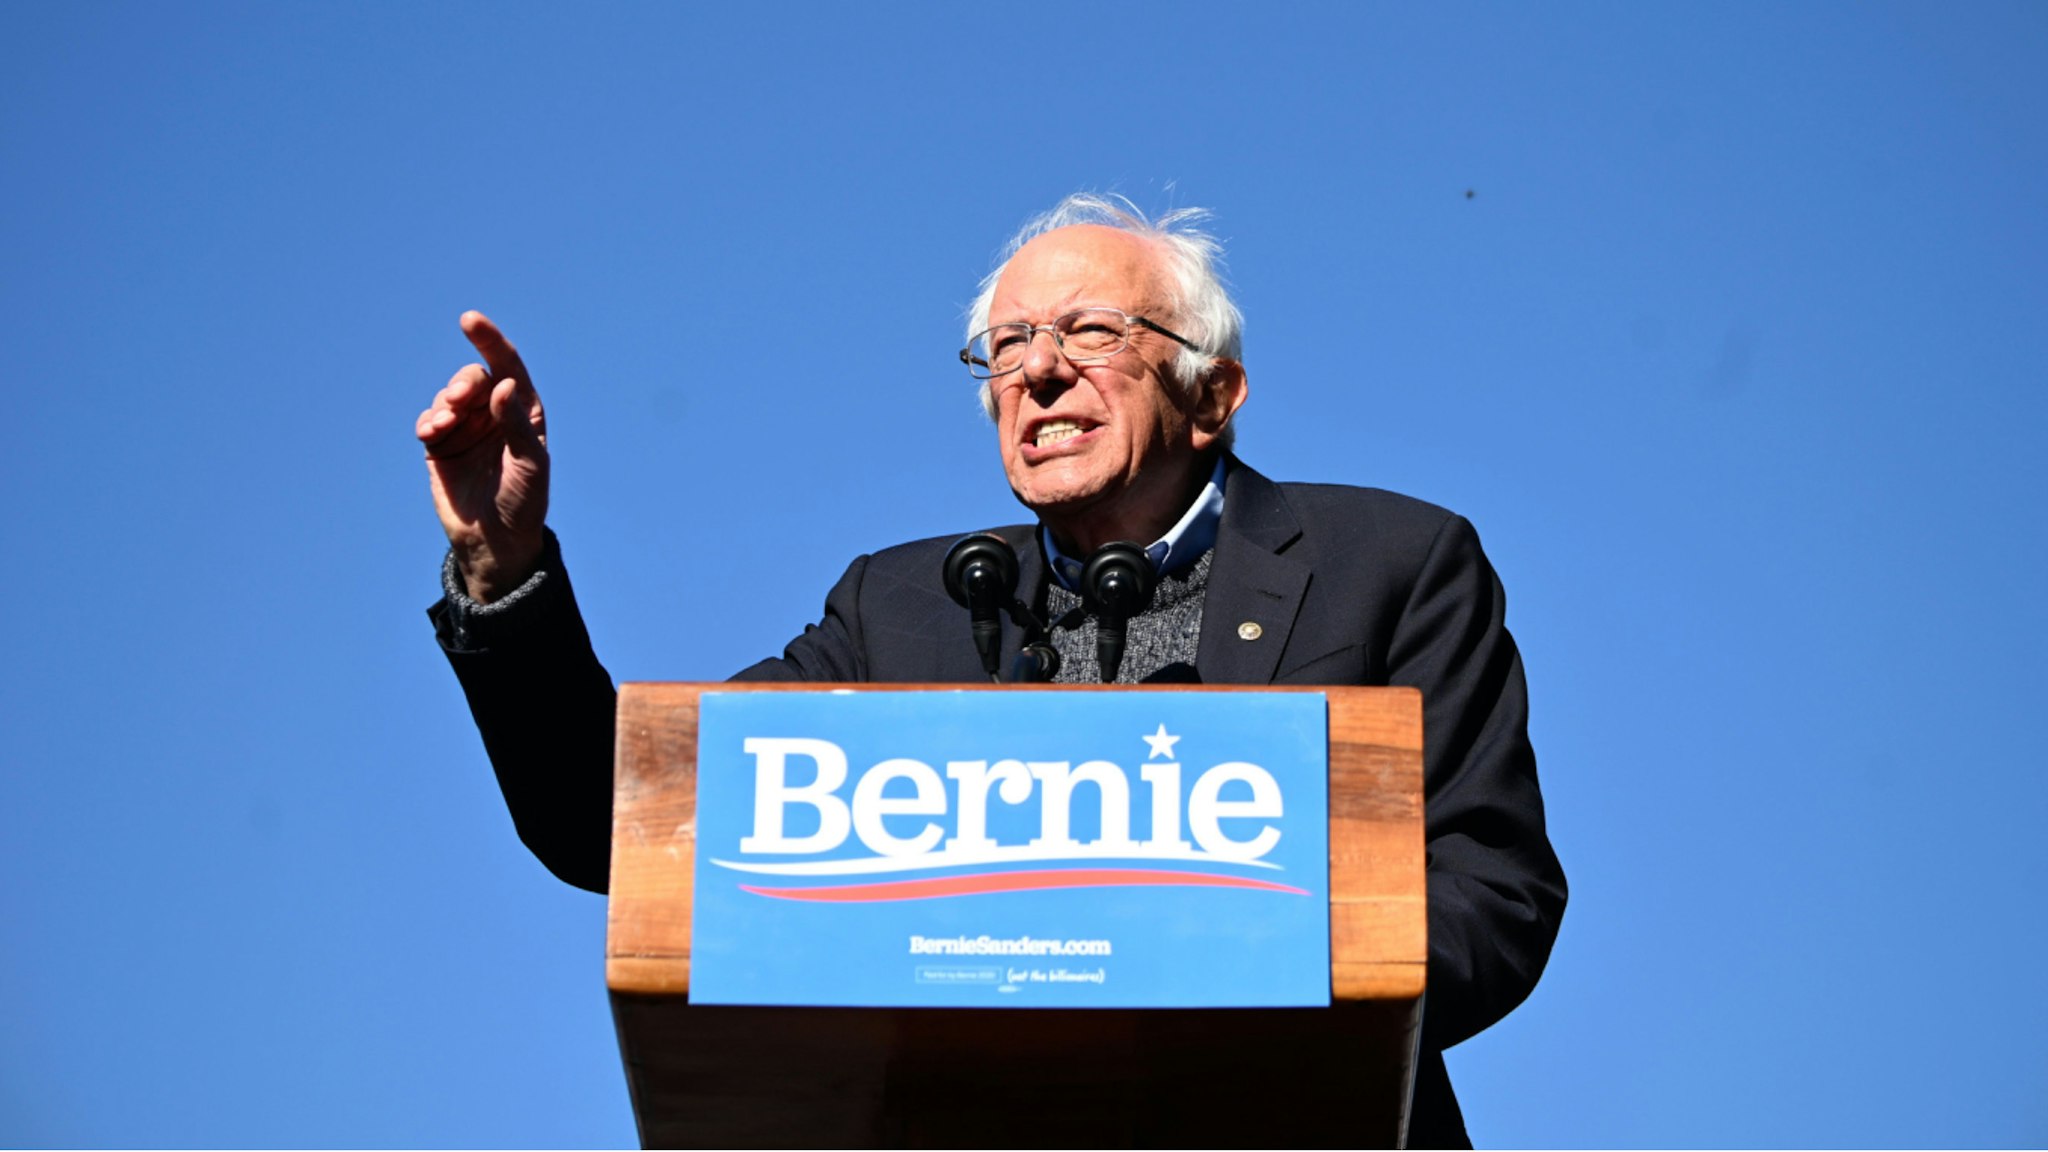 2020 Democratic presidential hopeful US Senator Bernie Sanders (D-VT) speaks to supporters during a campaign rally on October 19, 2019 in New York City.